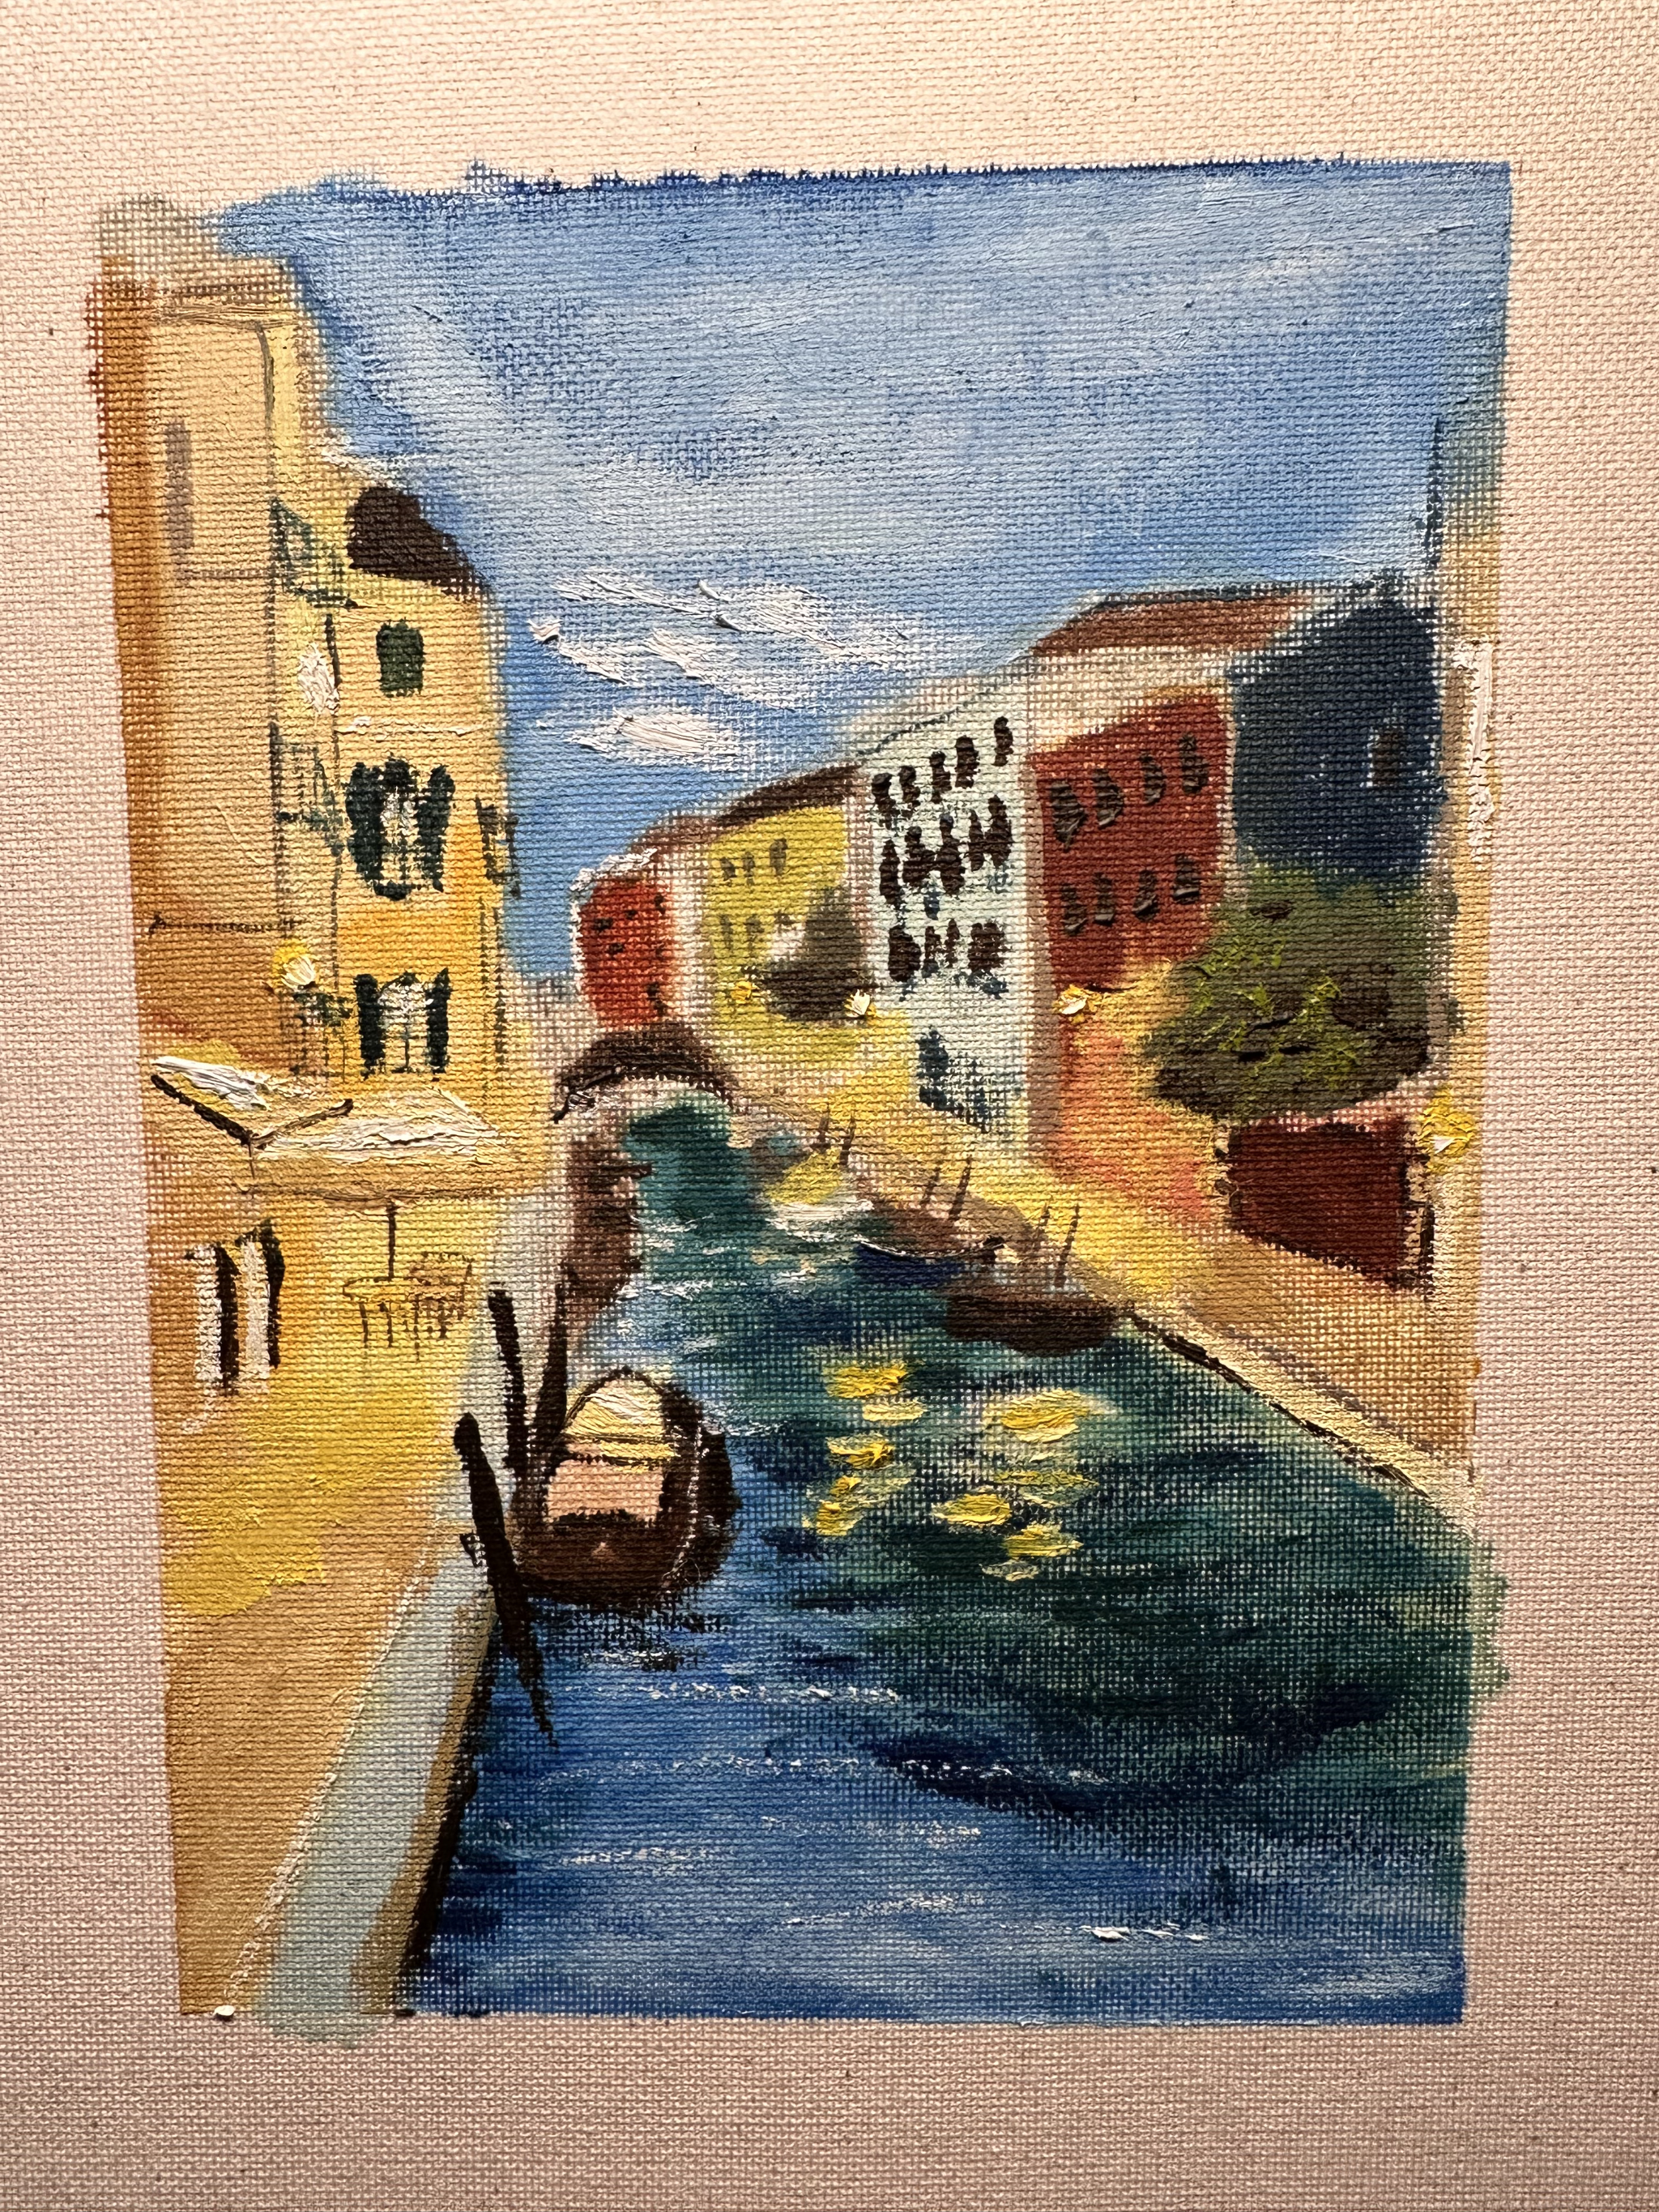 An oil painting of looking down a canal in Venice at dusk. The sky and water make blue the dominant color, but the left bank has bright yellows and tans due to lights.